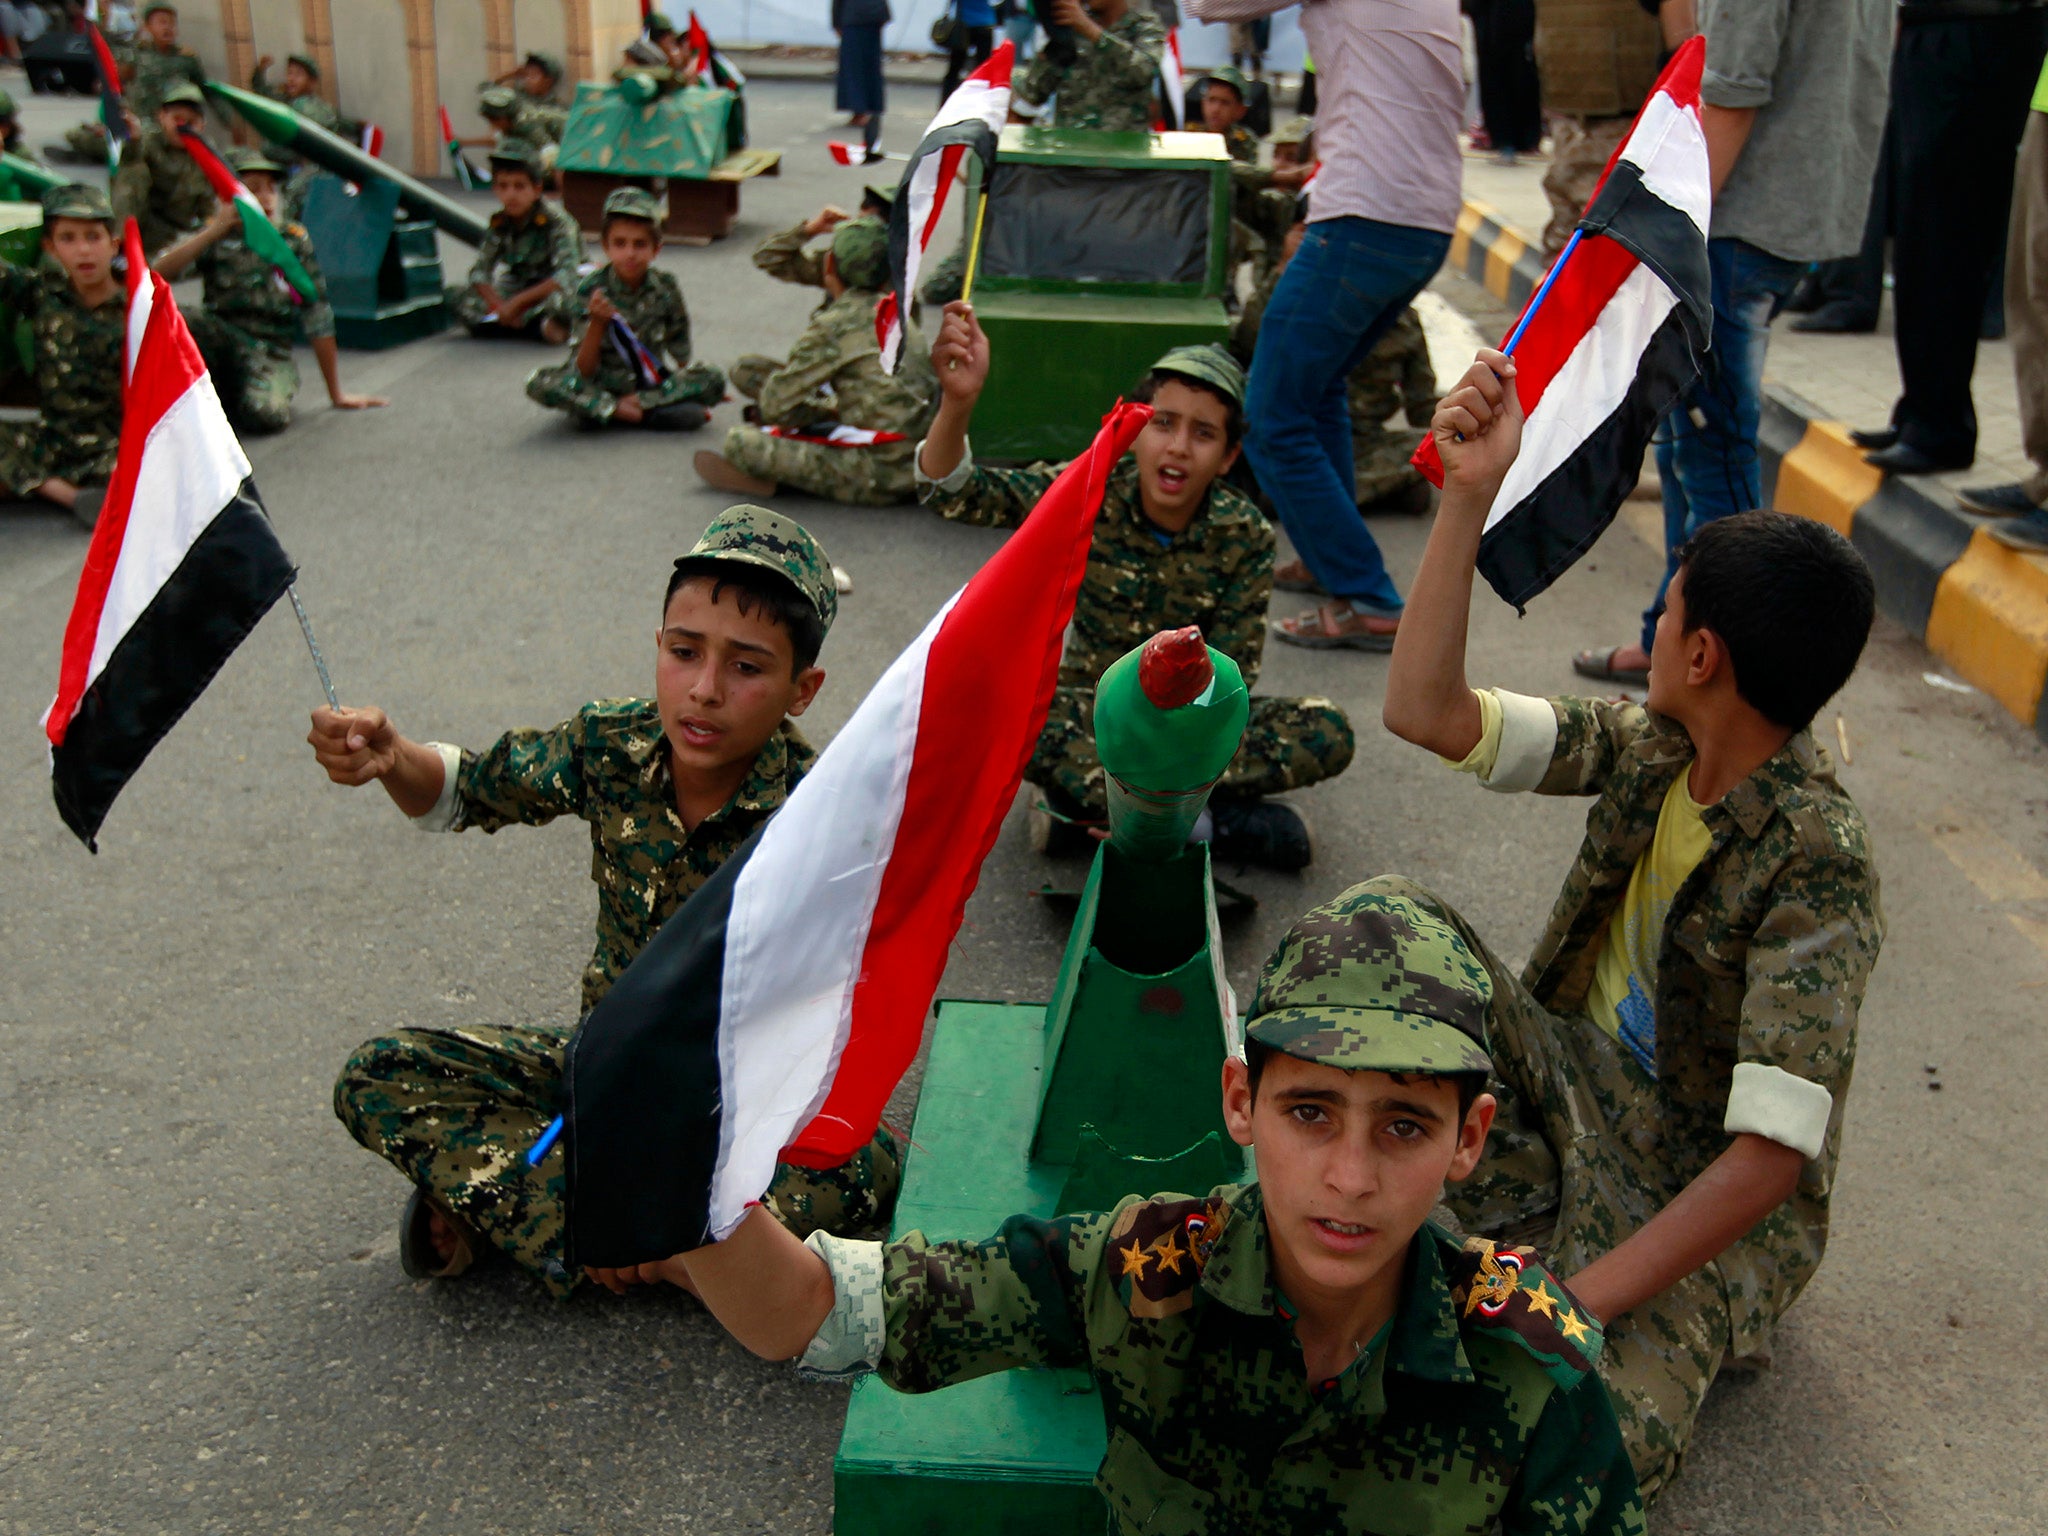 Yemen children waving national flags at rally in support of the Houthi rebels on Quds day in the capital Sanaa